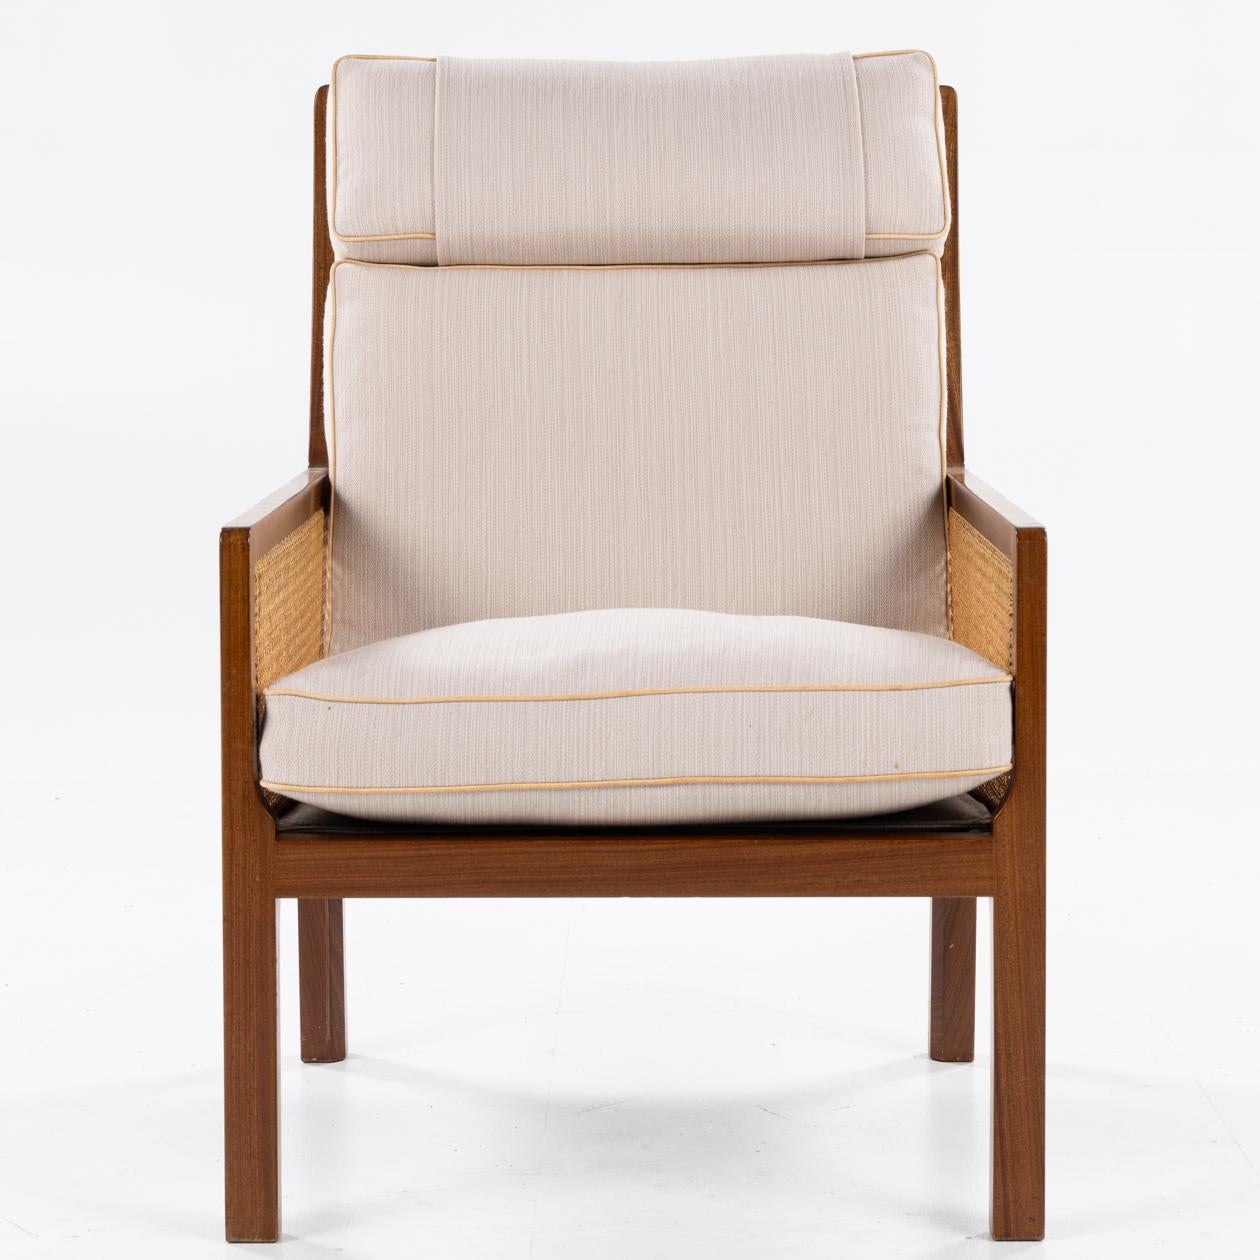 20th Century Easy chair in mahogany by Bernt Petersen. 